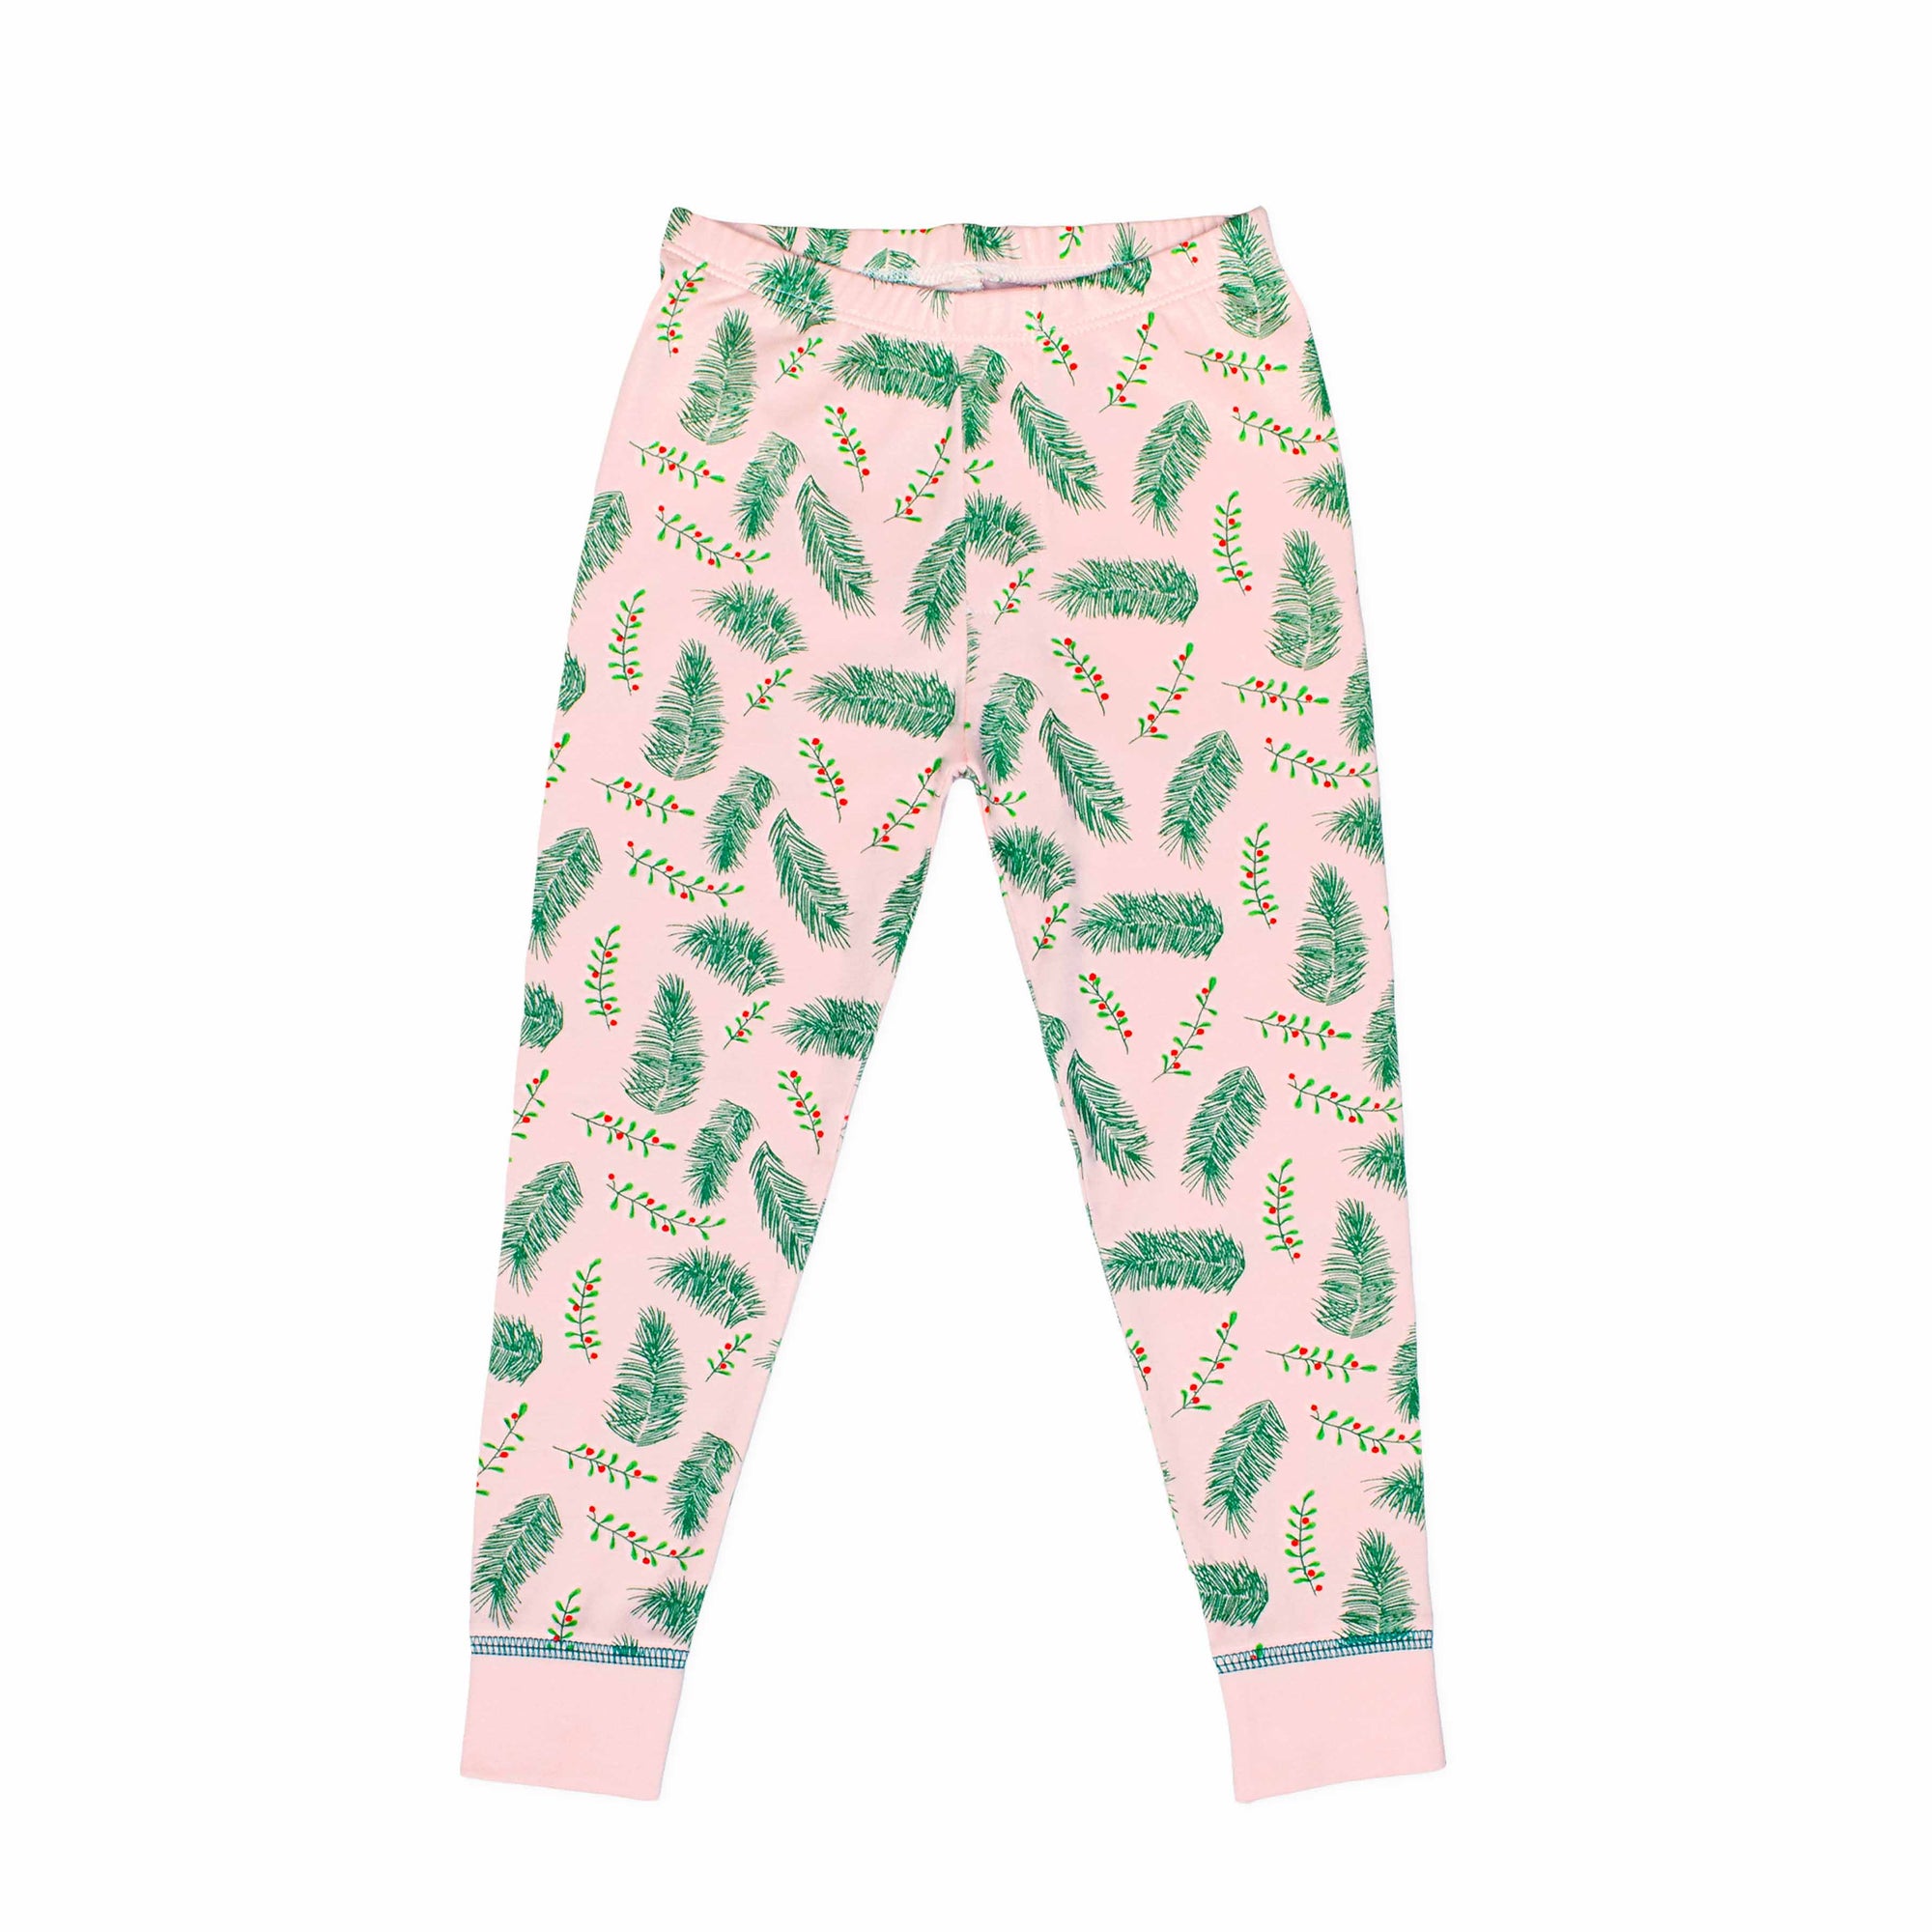 Pink two-piece pajama bottoms with vintage Christmas holly pattern made with pima cotton